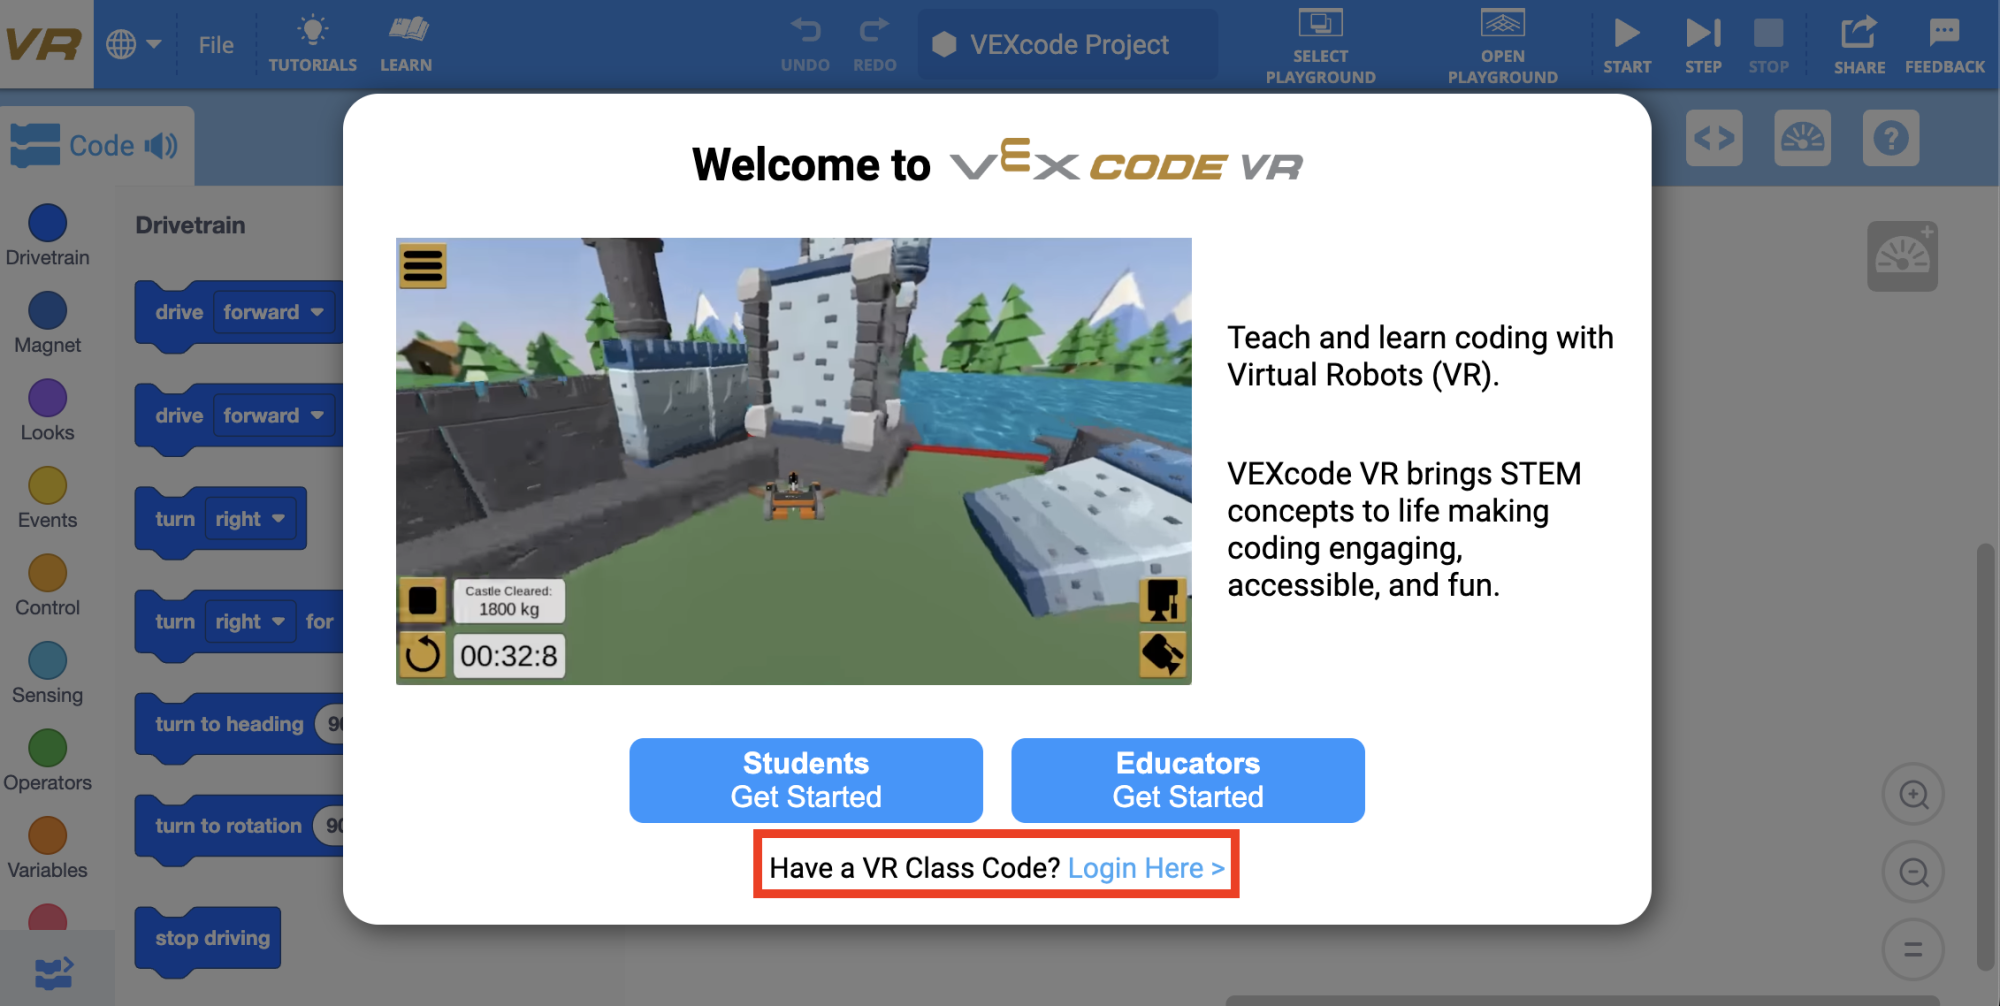 Pop up when VEXcode VR is launched to login with class code